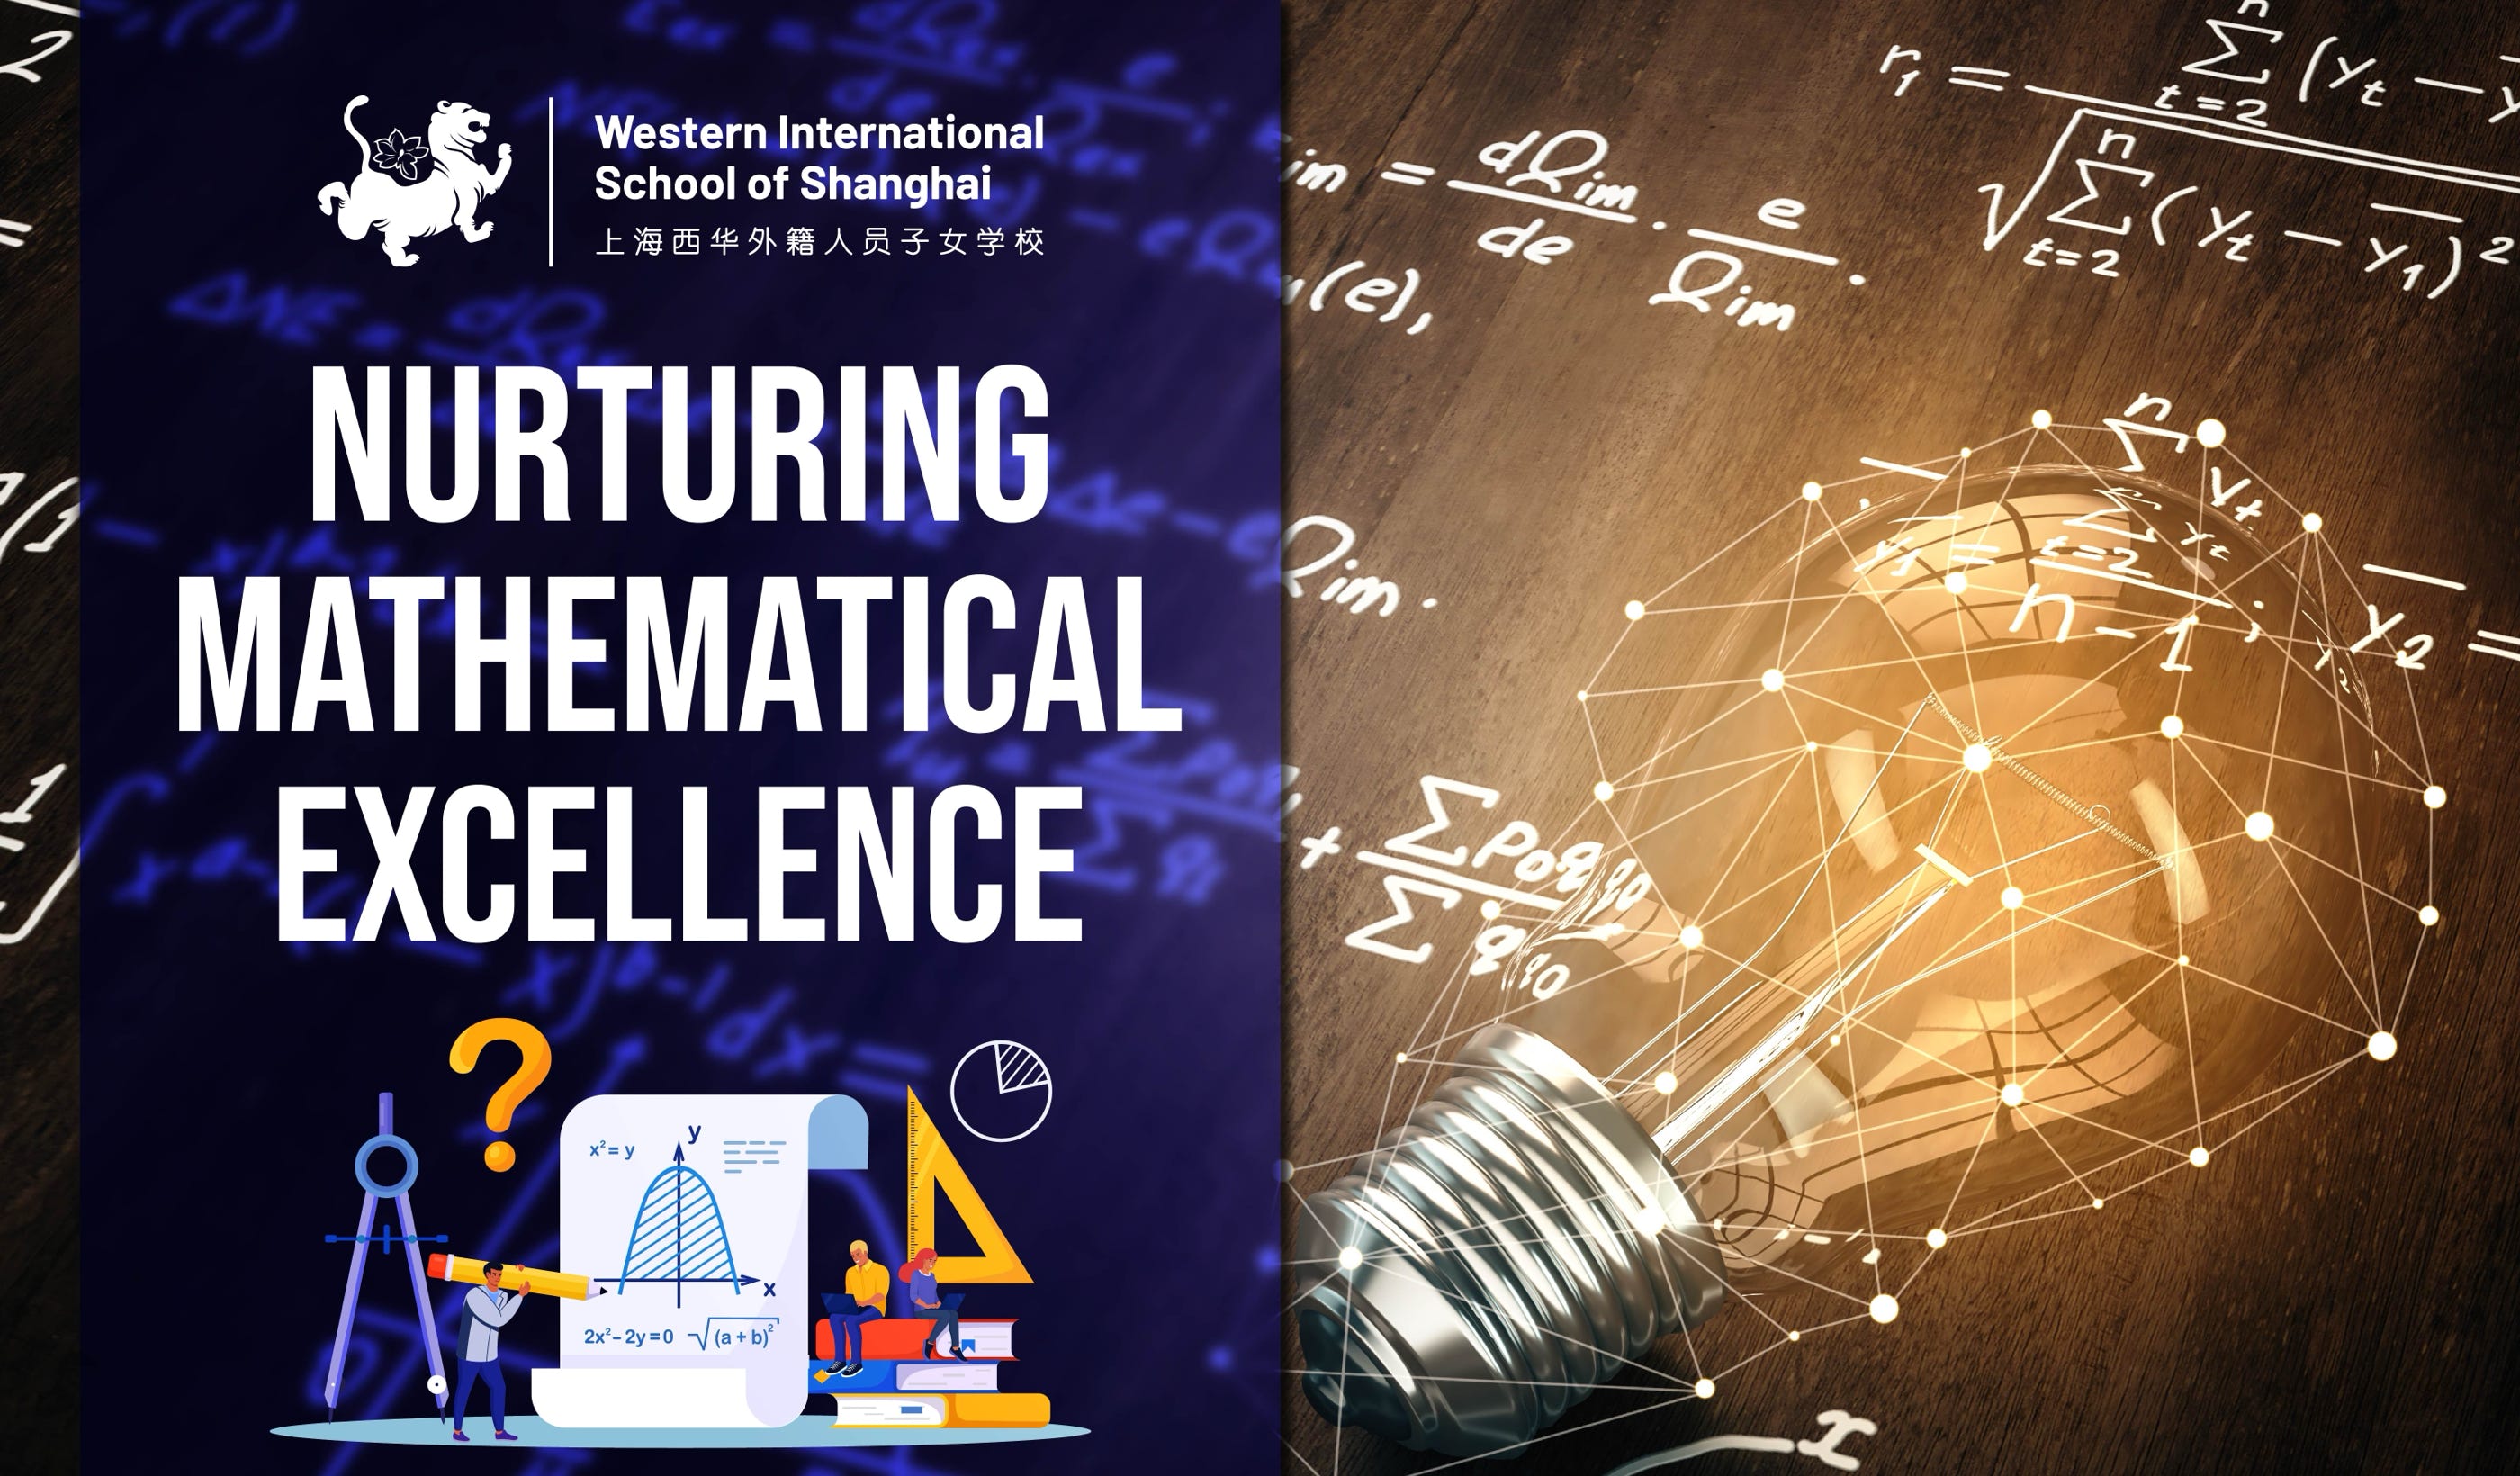 Mathematics is not only a subject that challenges and fascinates students but also one that can define their academic journey. At the Western International School of Shanghai (WISS), we are committed to nurturing the mathematical potential of every child, empowering them to achieve excellence in this critical field. Our dedicated and experienced teachers have developed a comprehensive pathway that highlights the strategies and resources available at WISS to foster mathematical excellence and cultivate a true love for mathematics. Join us as we delve into the remarkable support system spanning from the Early Years through Primary, Secondary, and beyond. Through engagement, we aim to provide an immersive understanding of how our programmes and methodologies align with our mission to nurture mathematical excellence in every student.